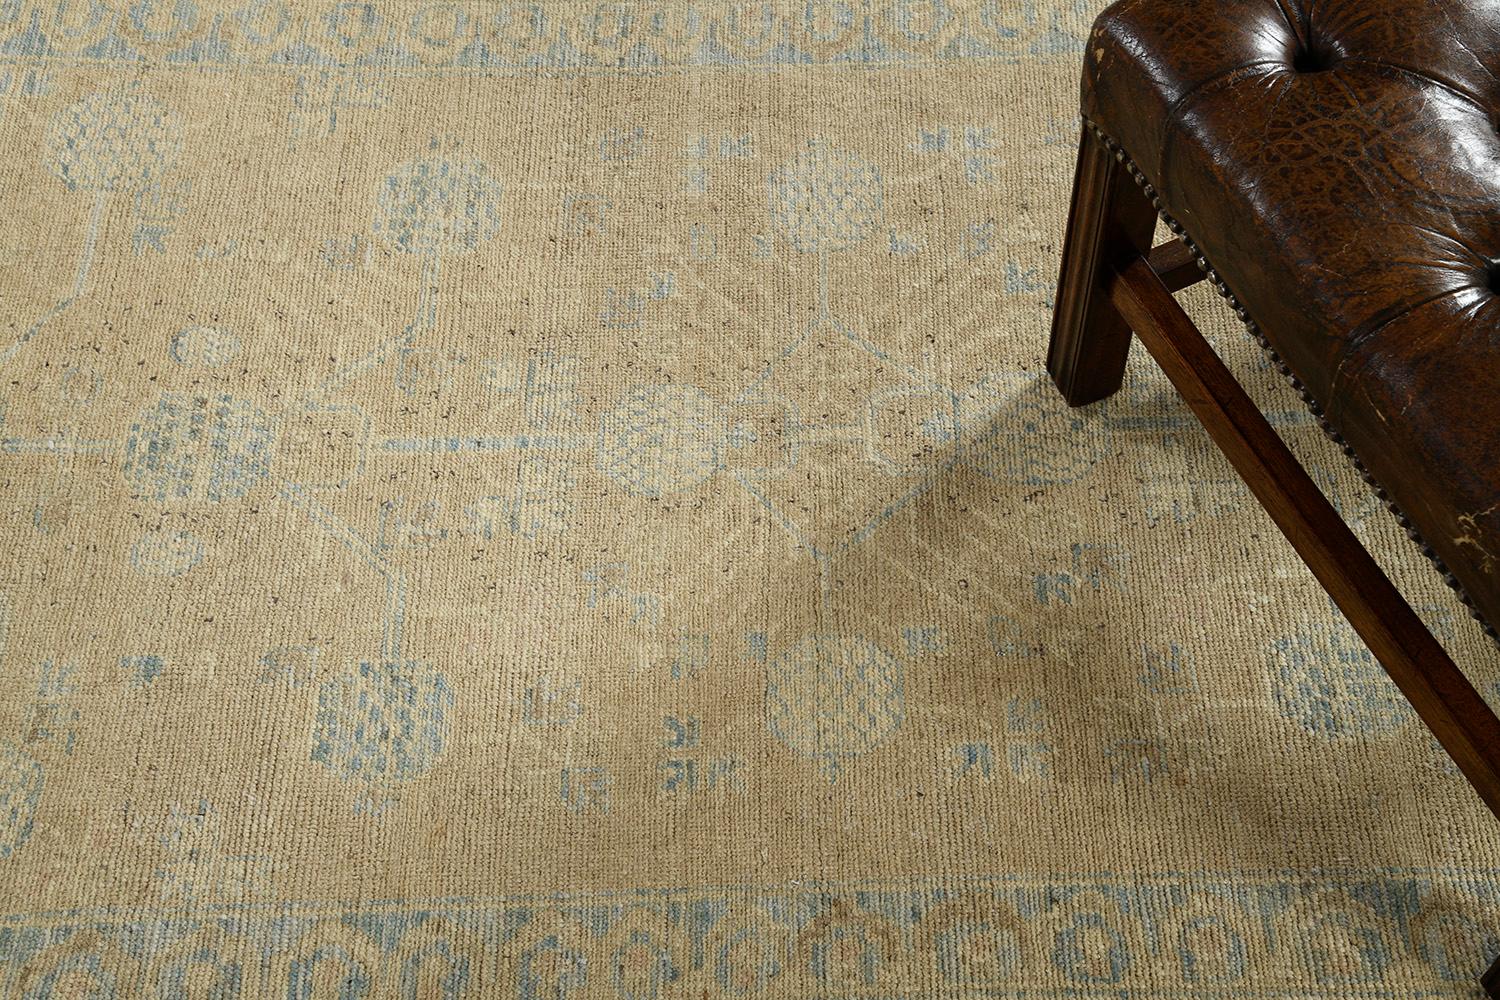 A gorgeous Khotan design runner that showcases a symmetrical pomegranate pattern connected by a network of florid elements enclosed by four floral meander guard bands. This magnificent rug exudes cozy and casual elegance with an idyllic coastal vibe